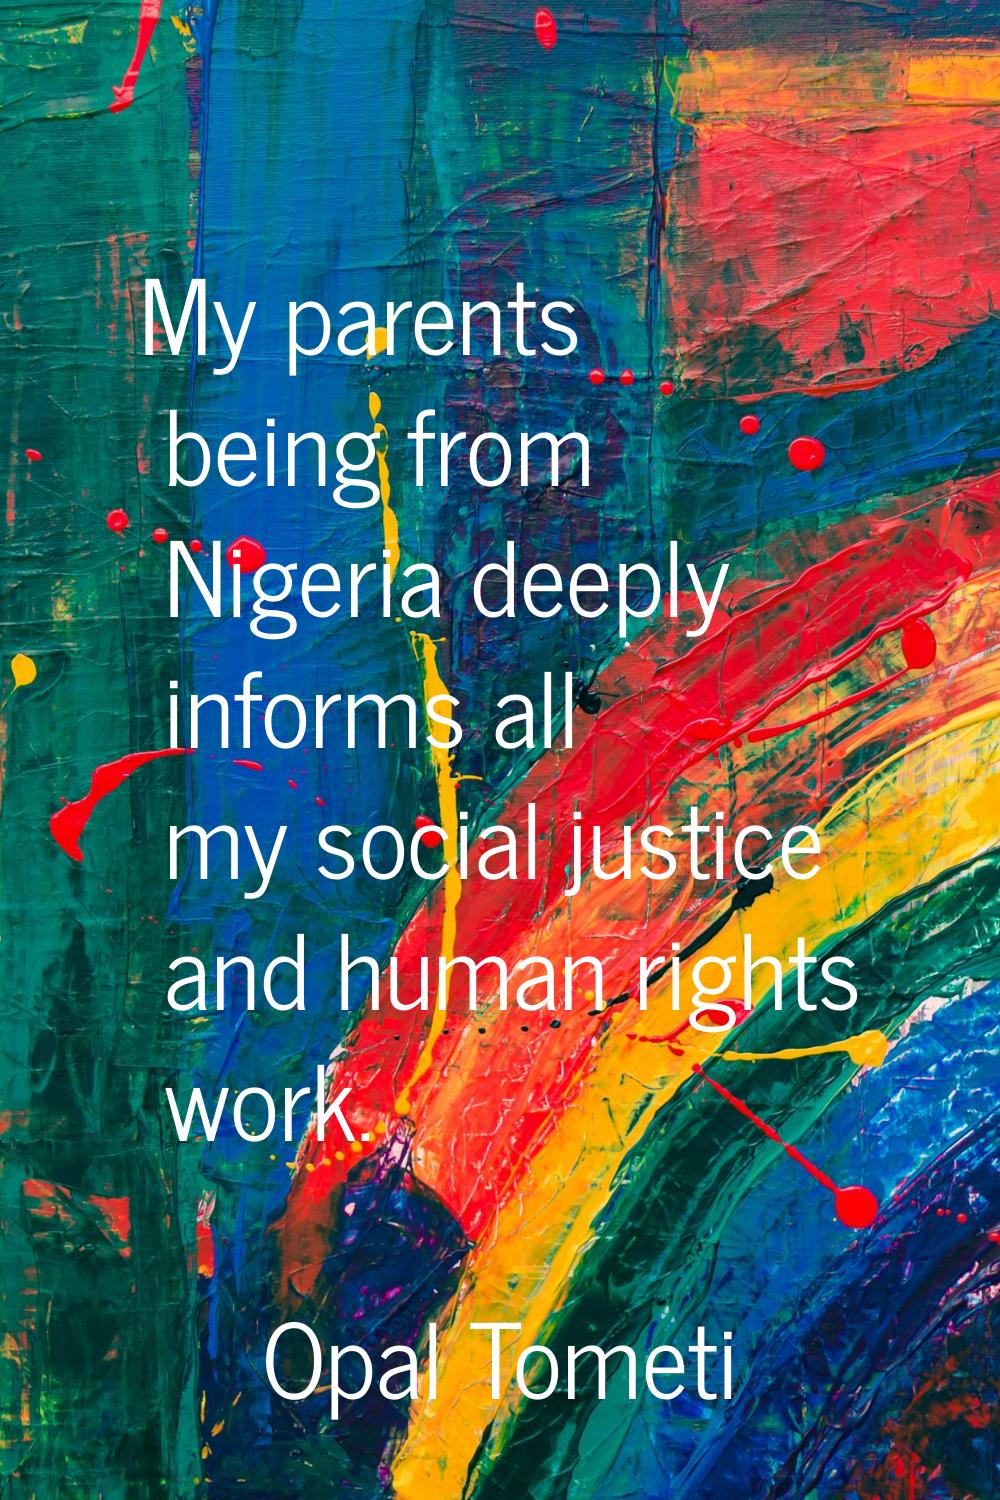 My parents being from Nigeria deeply informs all my social justice and human rights work.